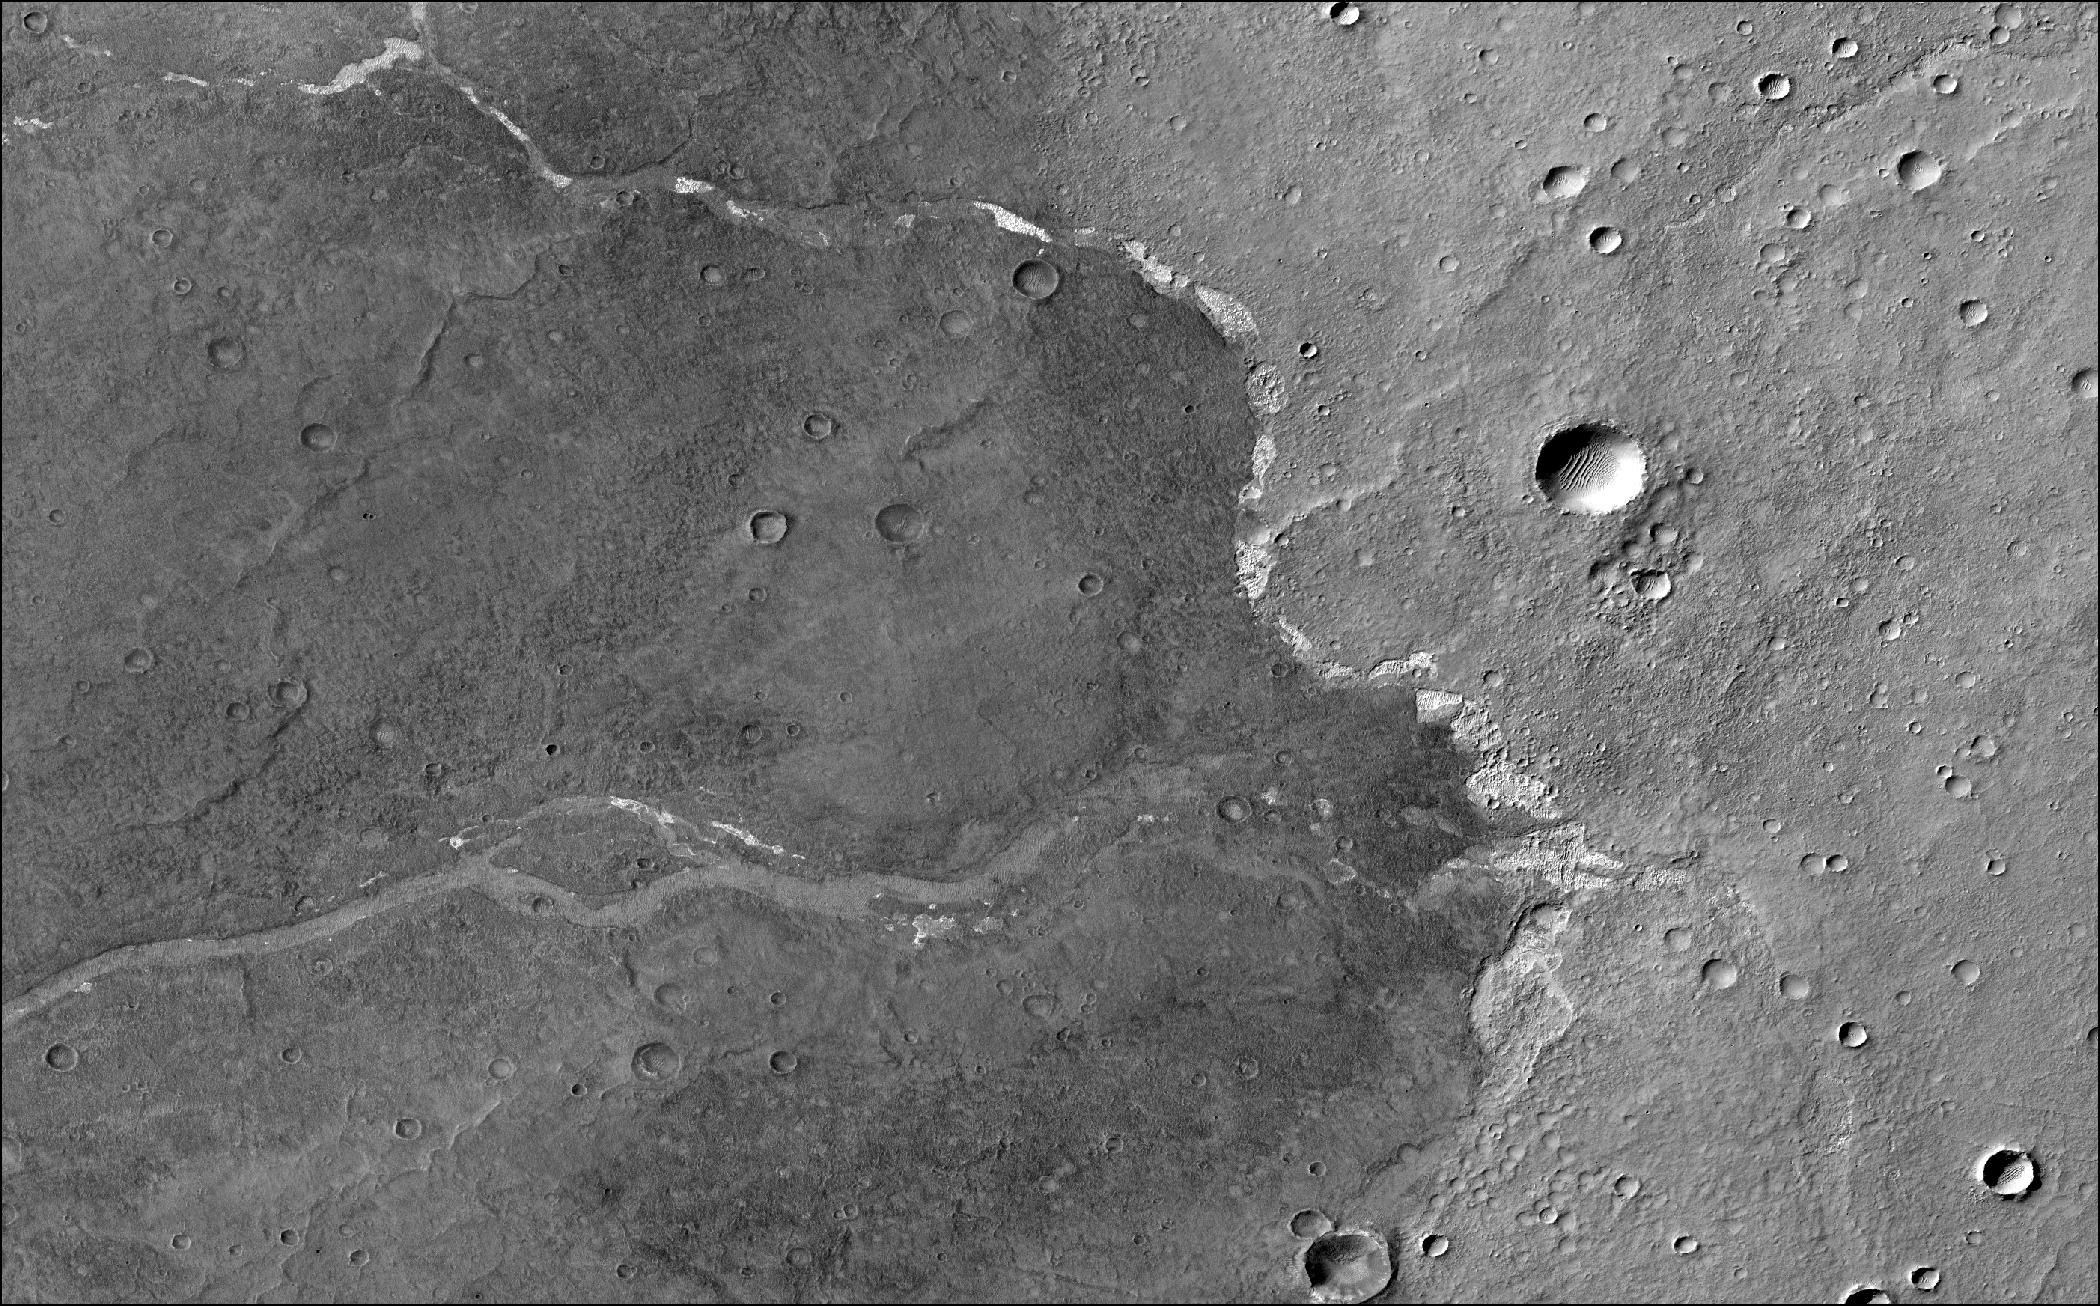 NASAs Mars Reconnaissance Orbiter used its Context Camera to capture this image of Bosporos Planum, a location on Mars. The white specks are salt deposits found within a dry channel.